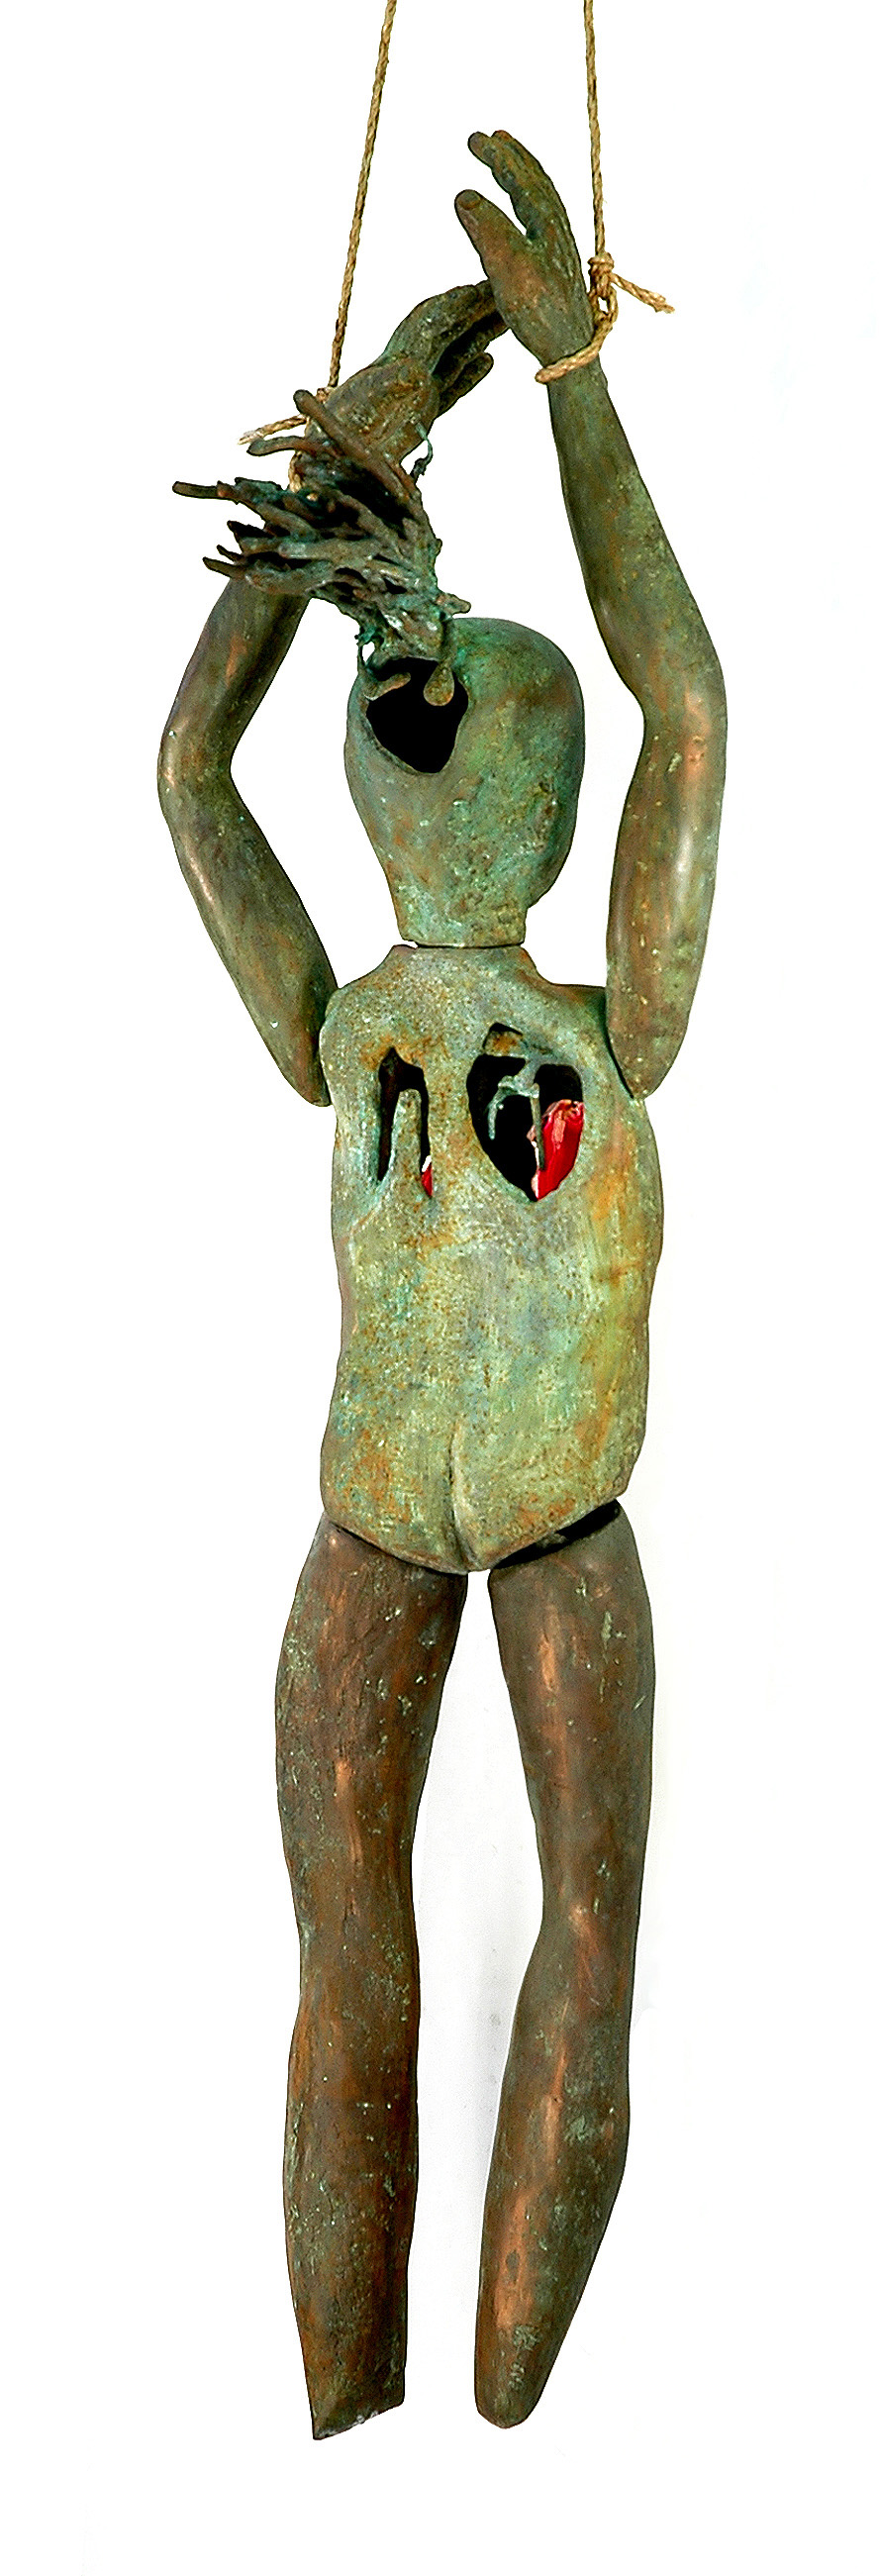 Puppet (back view), 2003-5